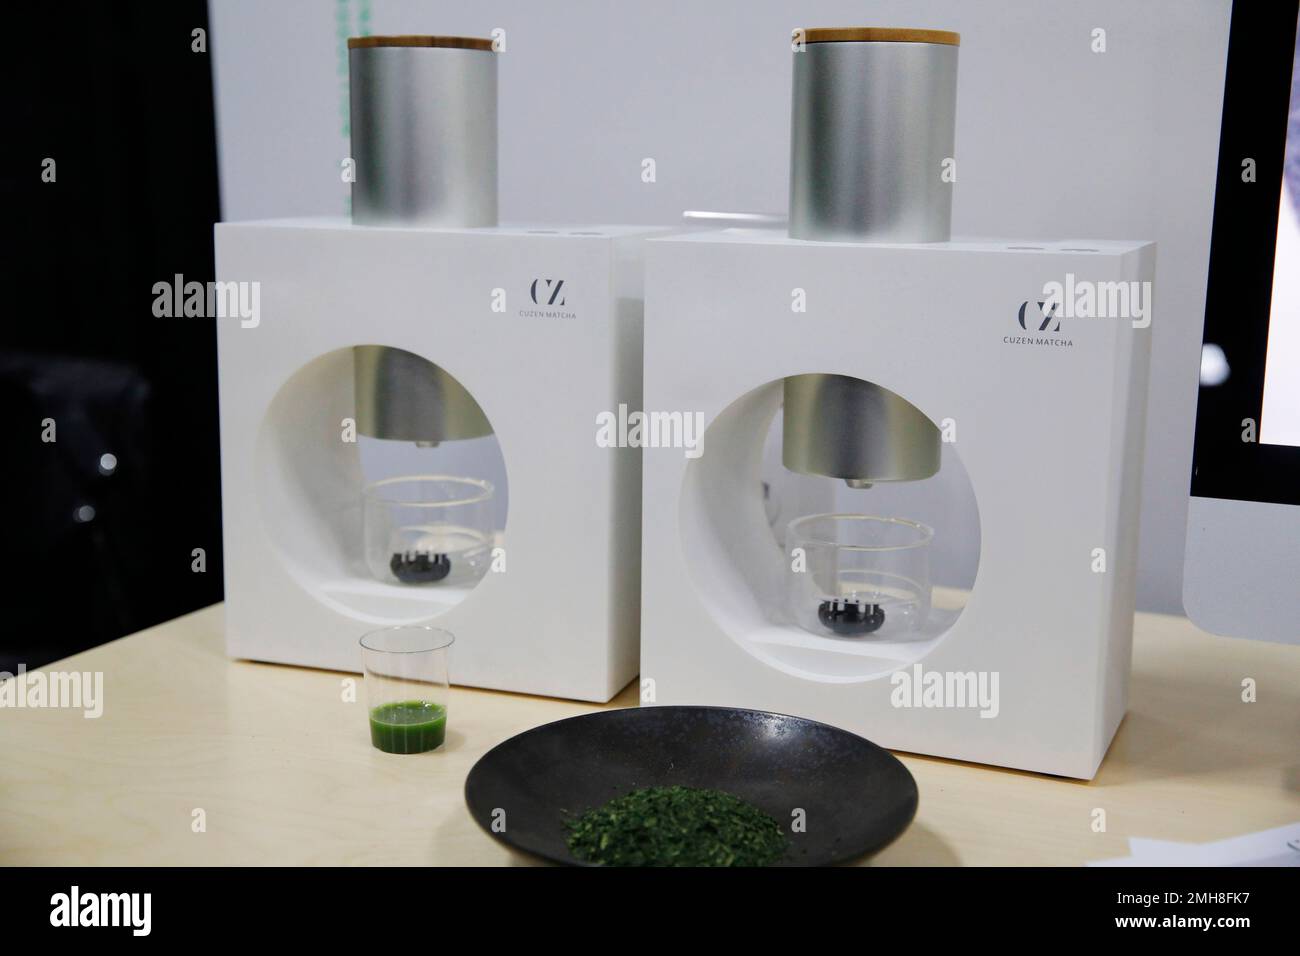 https://c8.alamy.com/comp/2MH8FK7/the-cuzen-matcha-maker-an-automatic-matcha-maker-appears-on-display-at-the-cuzen-matcha-booth-during-ces-unveiled-before-ces-international-sunday-jan-5-2020-in-las-vegas-ap-photojohn-locher-2MH8FK7.jpg